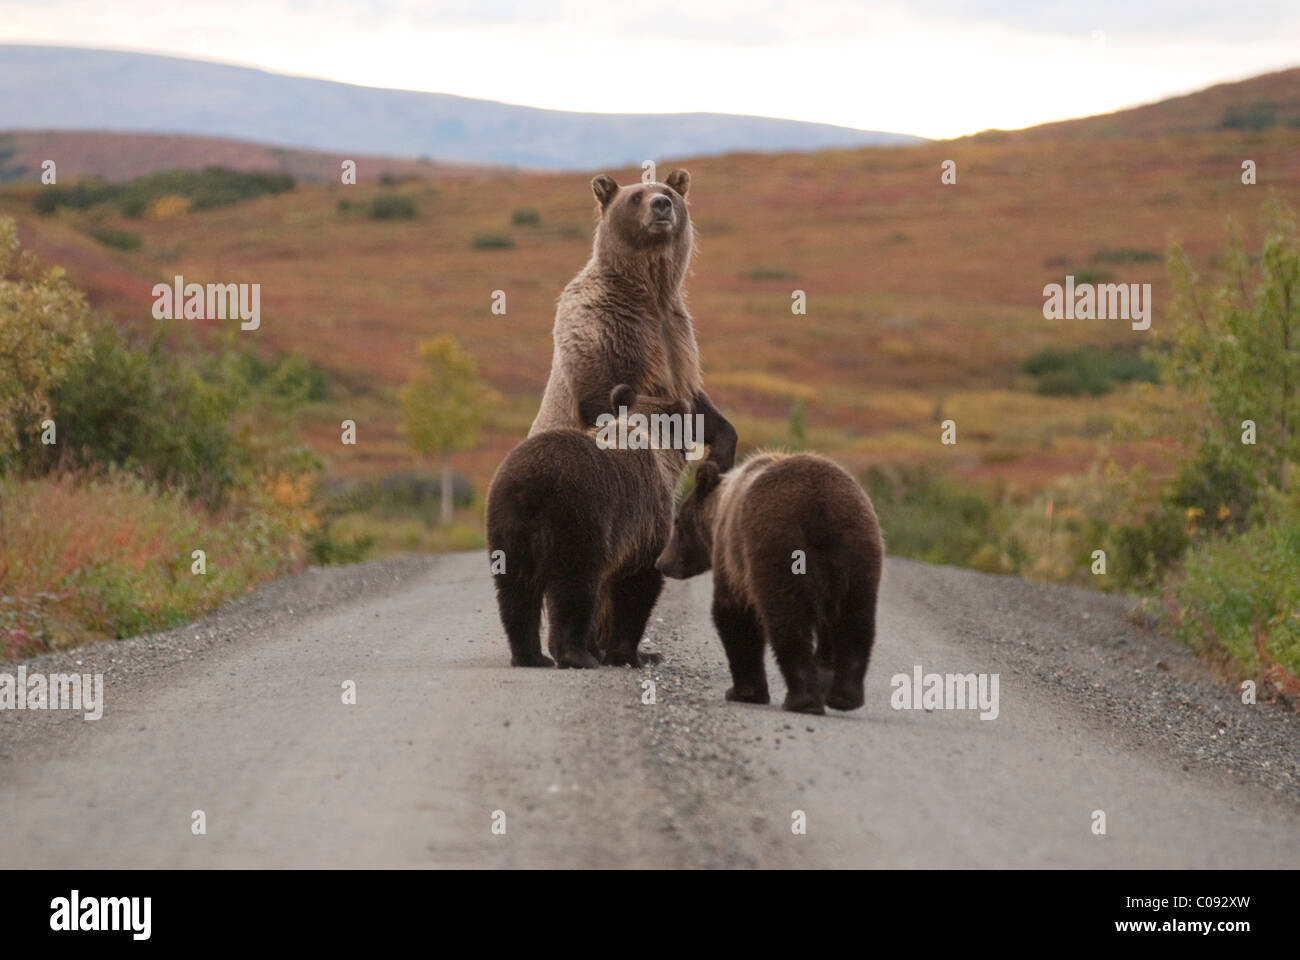 An alert Grizzly sow stands on her hind feet with cubs while on the park road near Wonder Lake in Denali National Park, Alaska Stock Photo